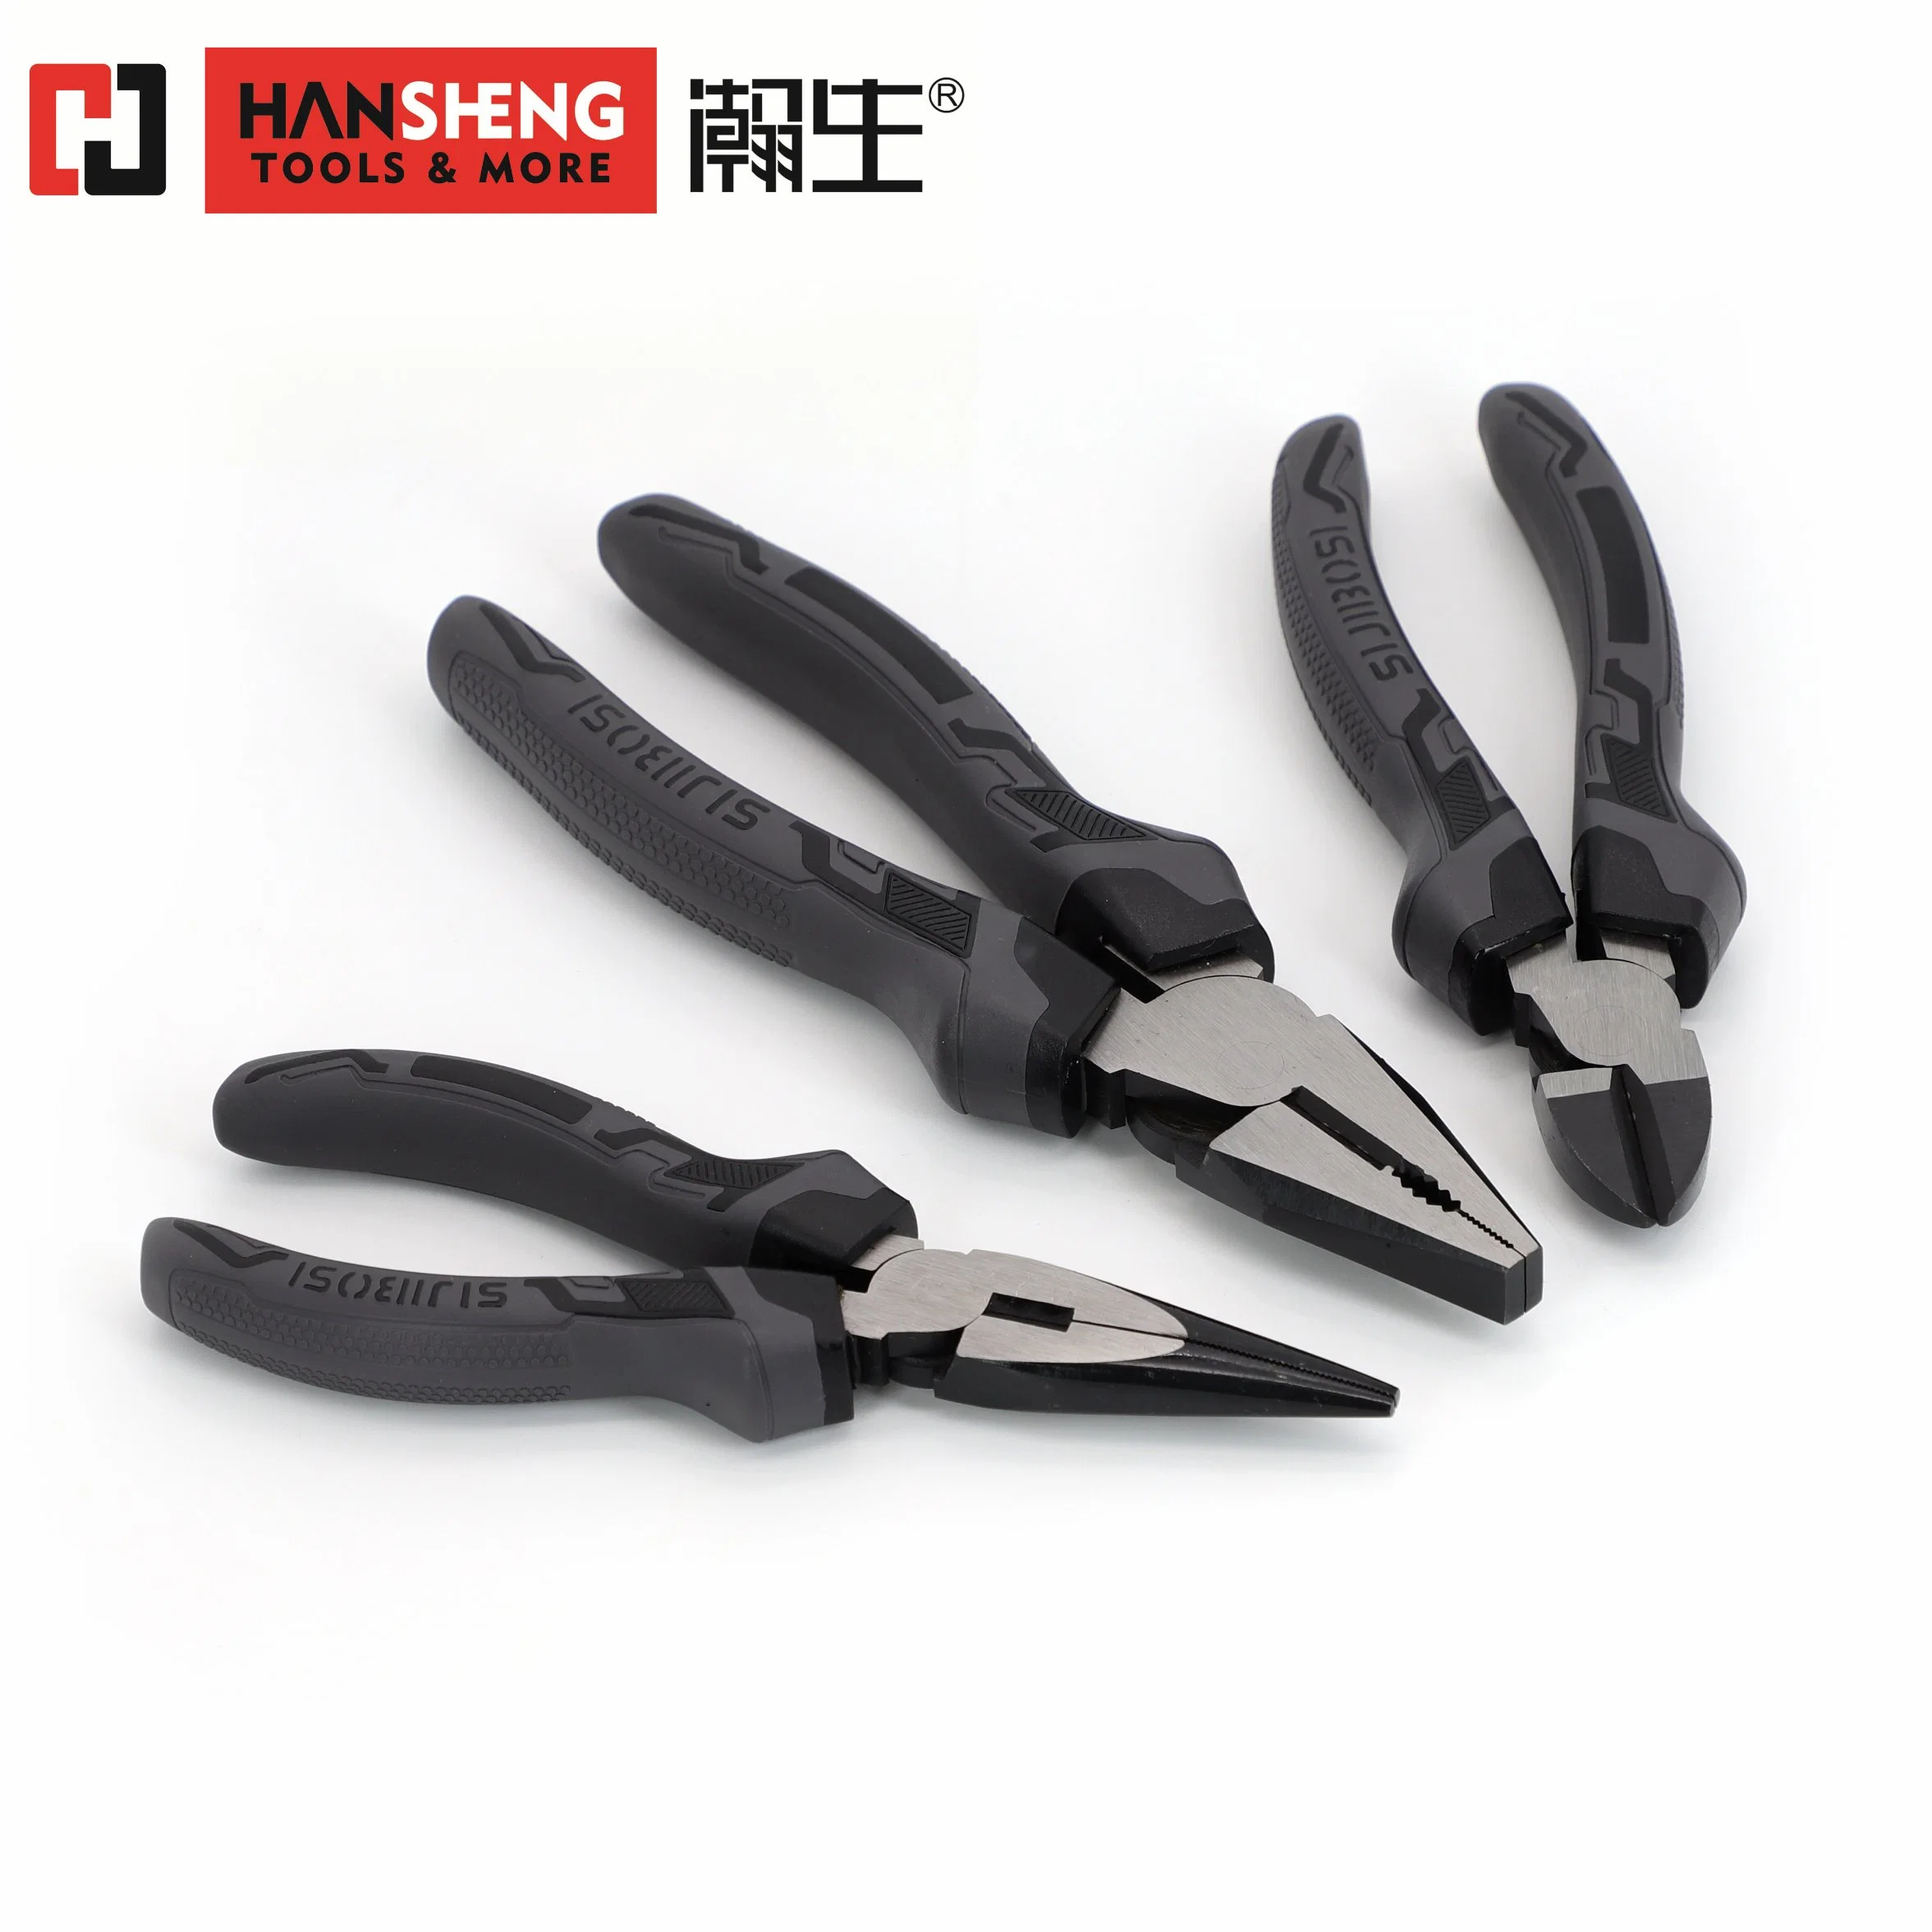 Professional Hardware 6" 7" 8" CRV Pliers Combination Pliers, Cutting Hand Tools,